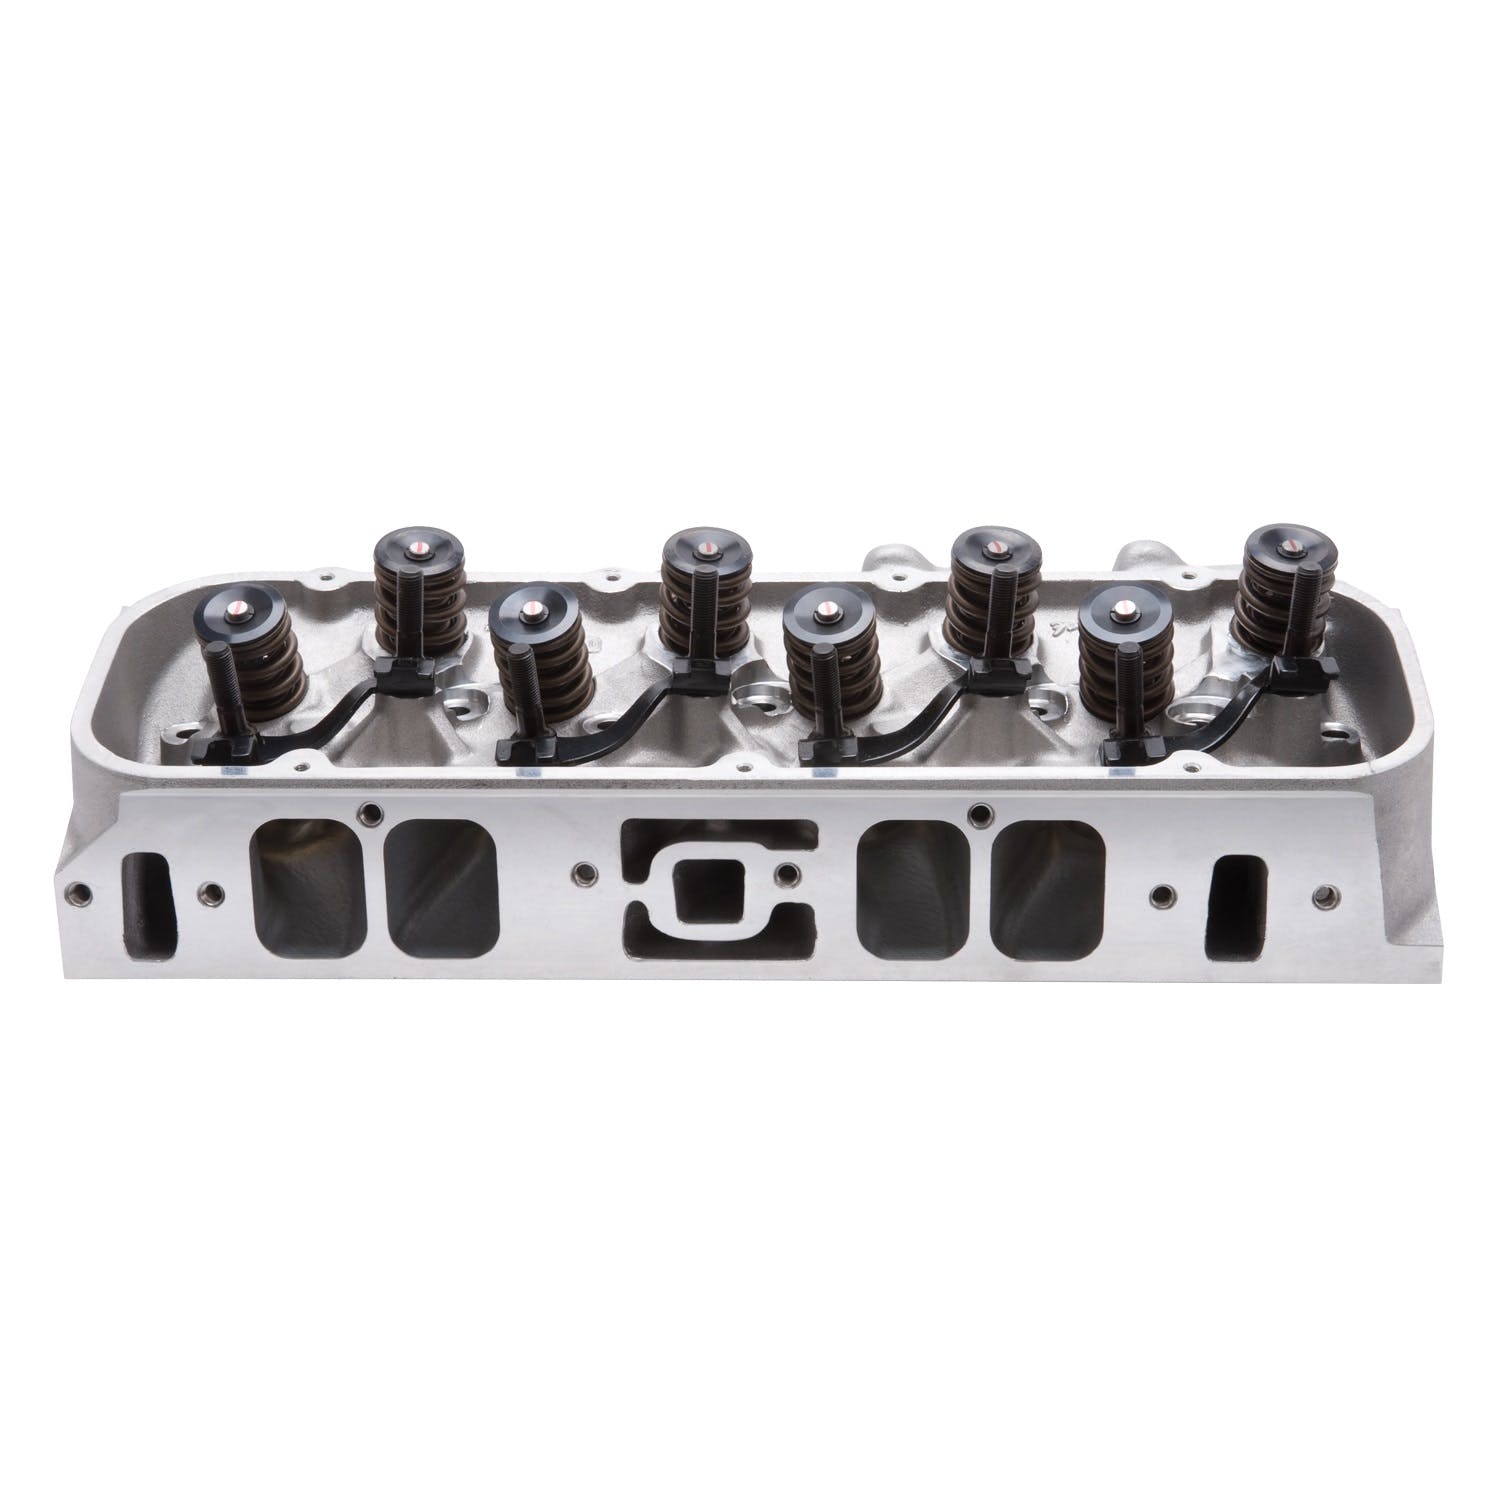 Edelbrock 79555 CYL HEAD BBC E-CNC 355 RECT PORT 118cc CHAMBER FOR HYD ROLLER CAM COMPLETE